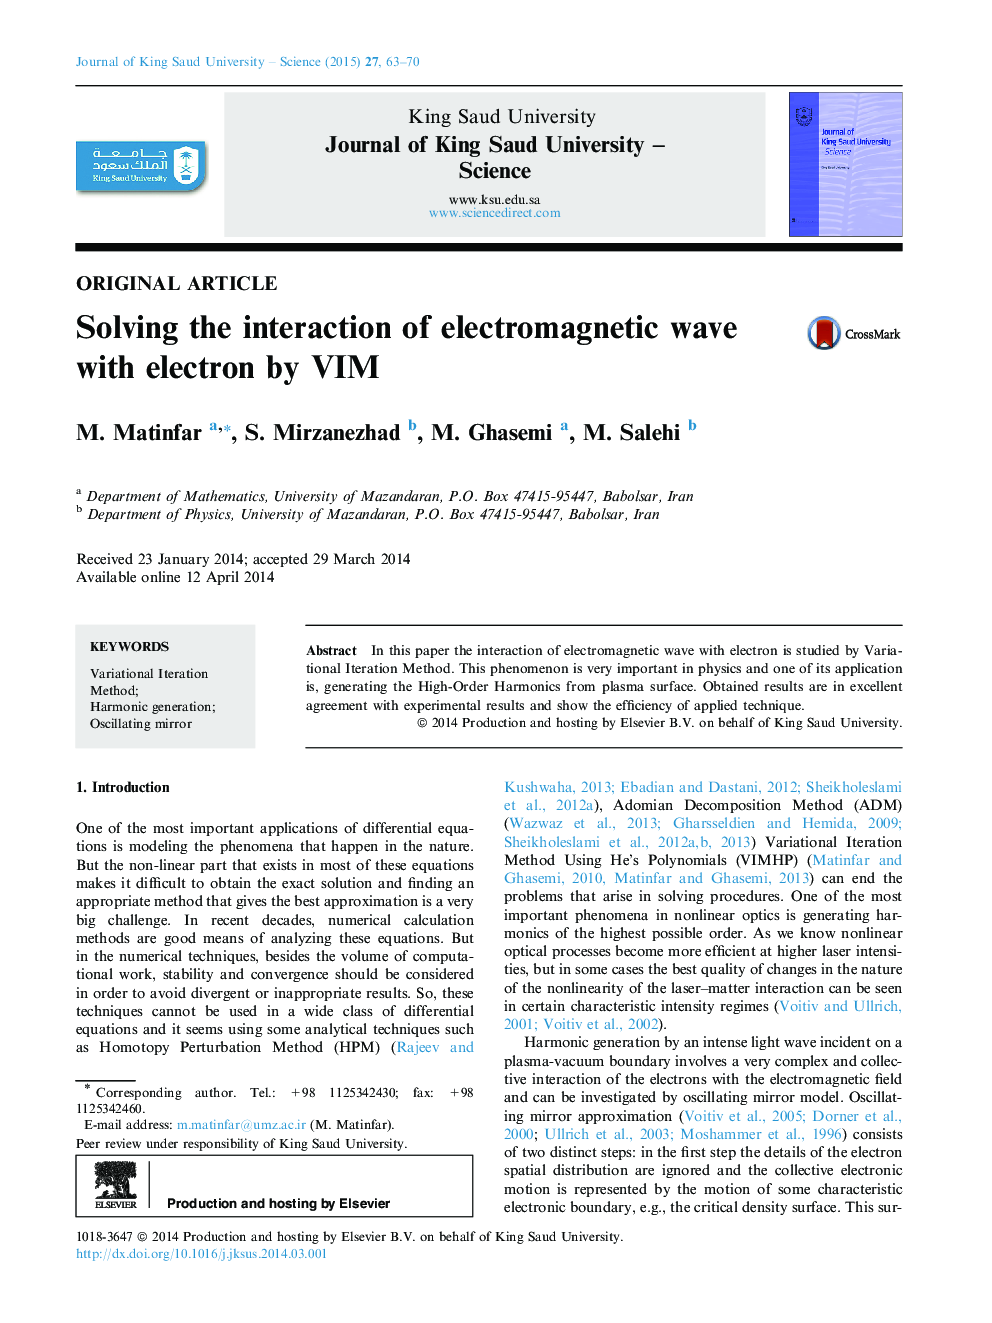 Solving the interaction of electromagnetic wave with electron by VIM 